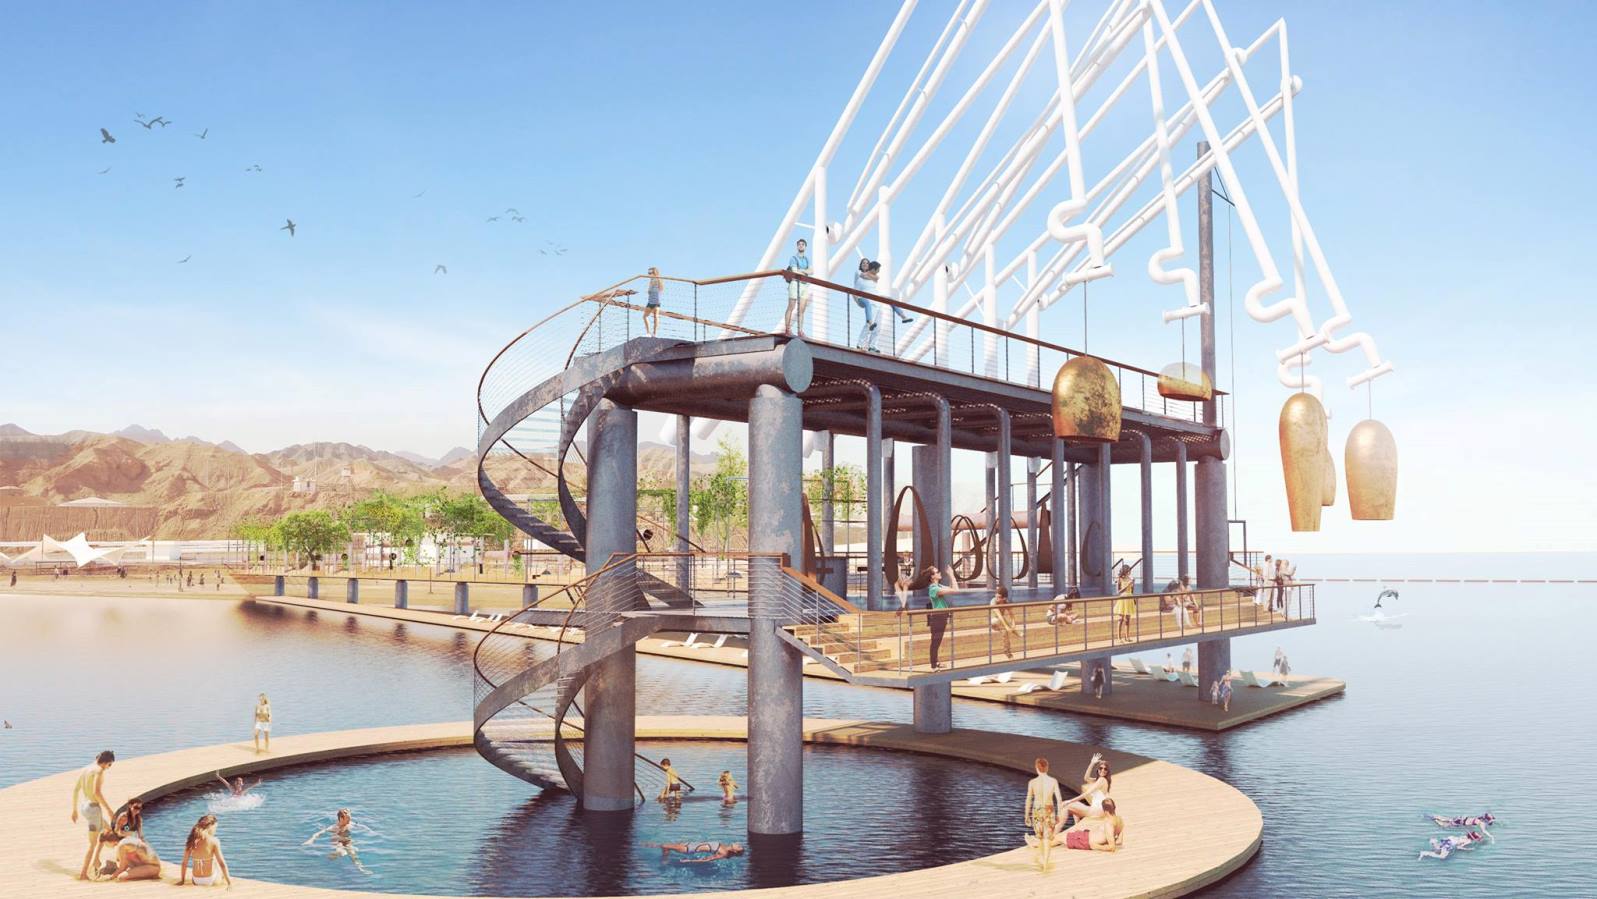 A simulation of the environmental pier planned for the newly public strip of beach in Eilat. Photo courtesy of Eilat Municipality